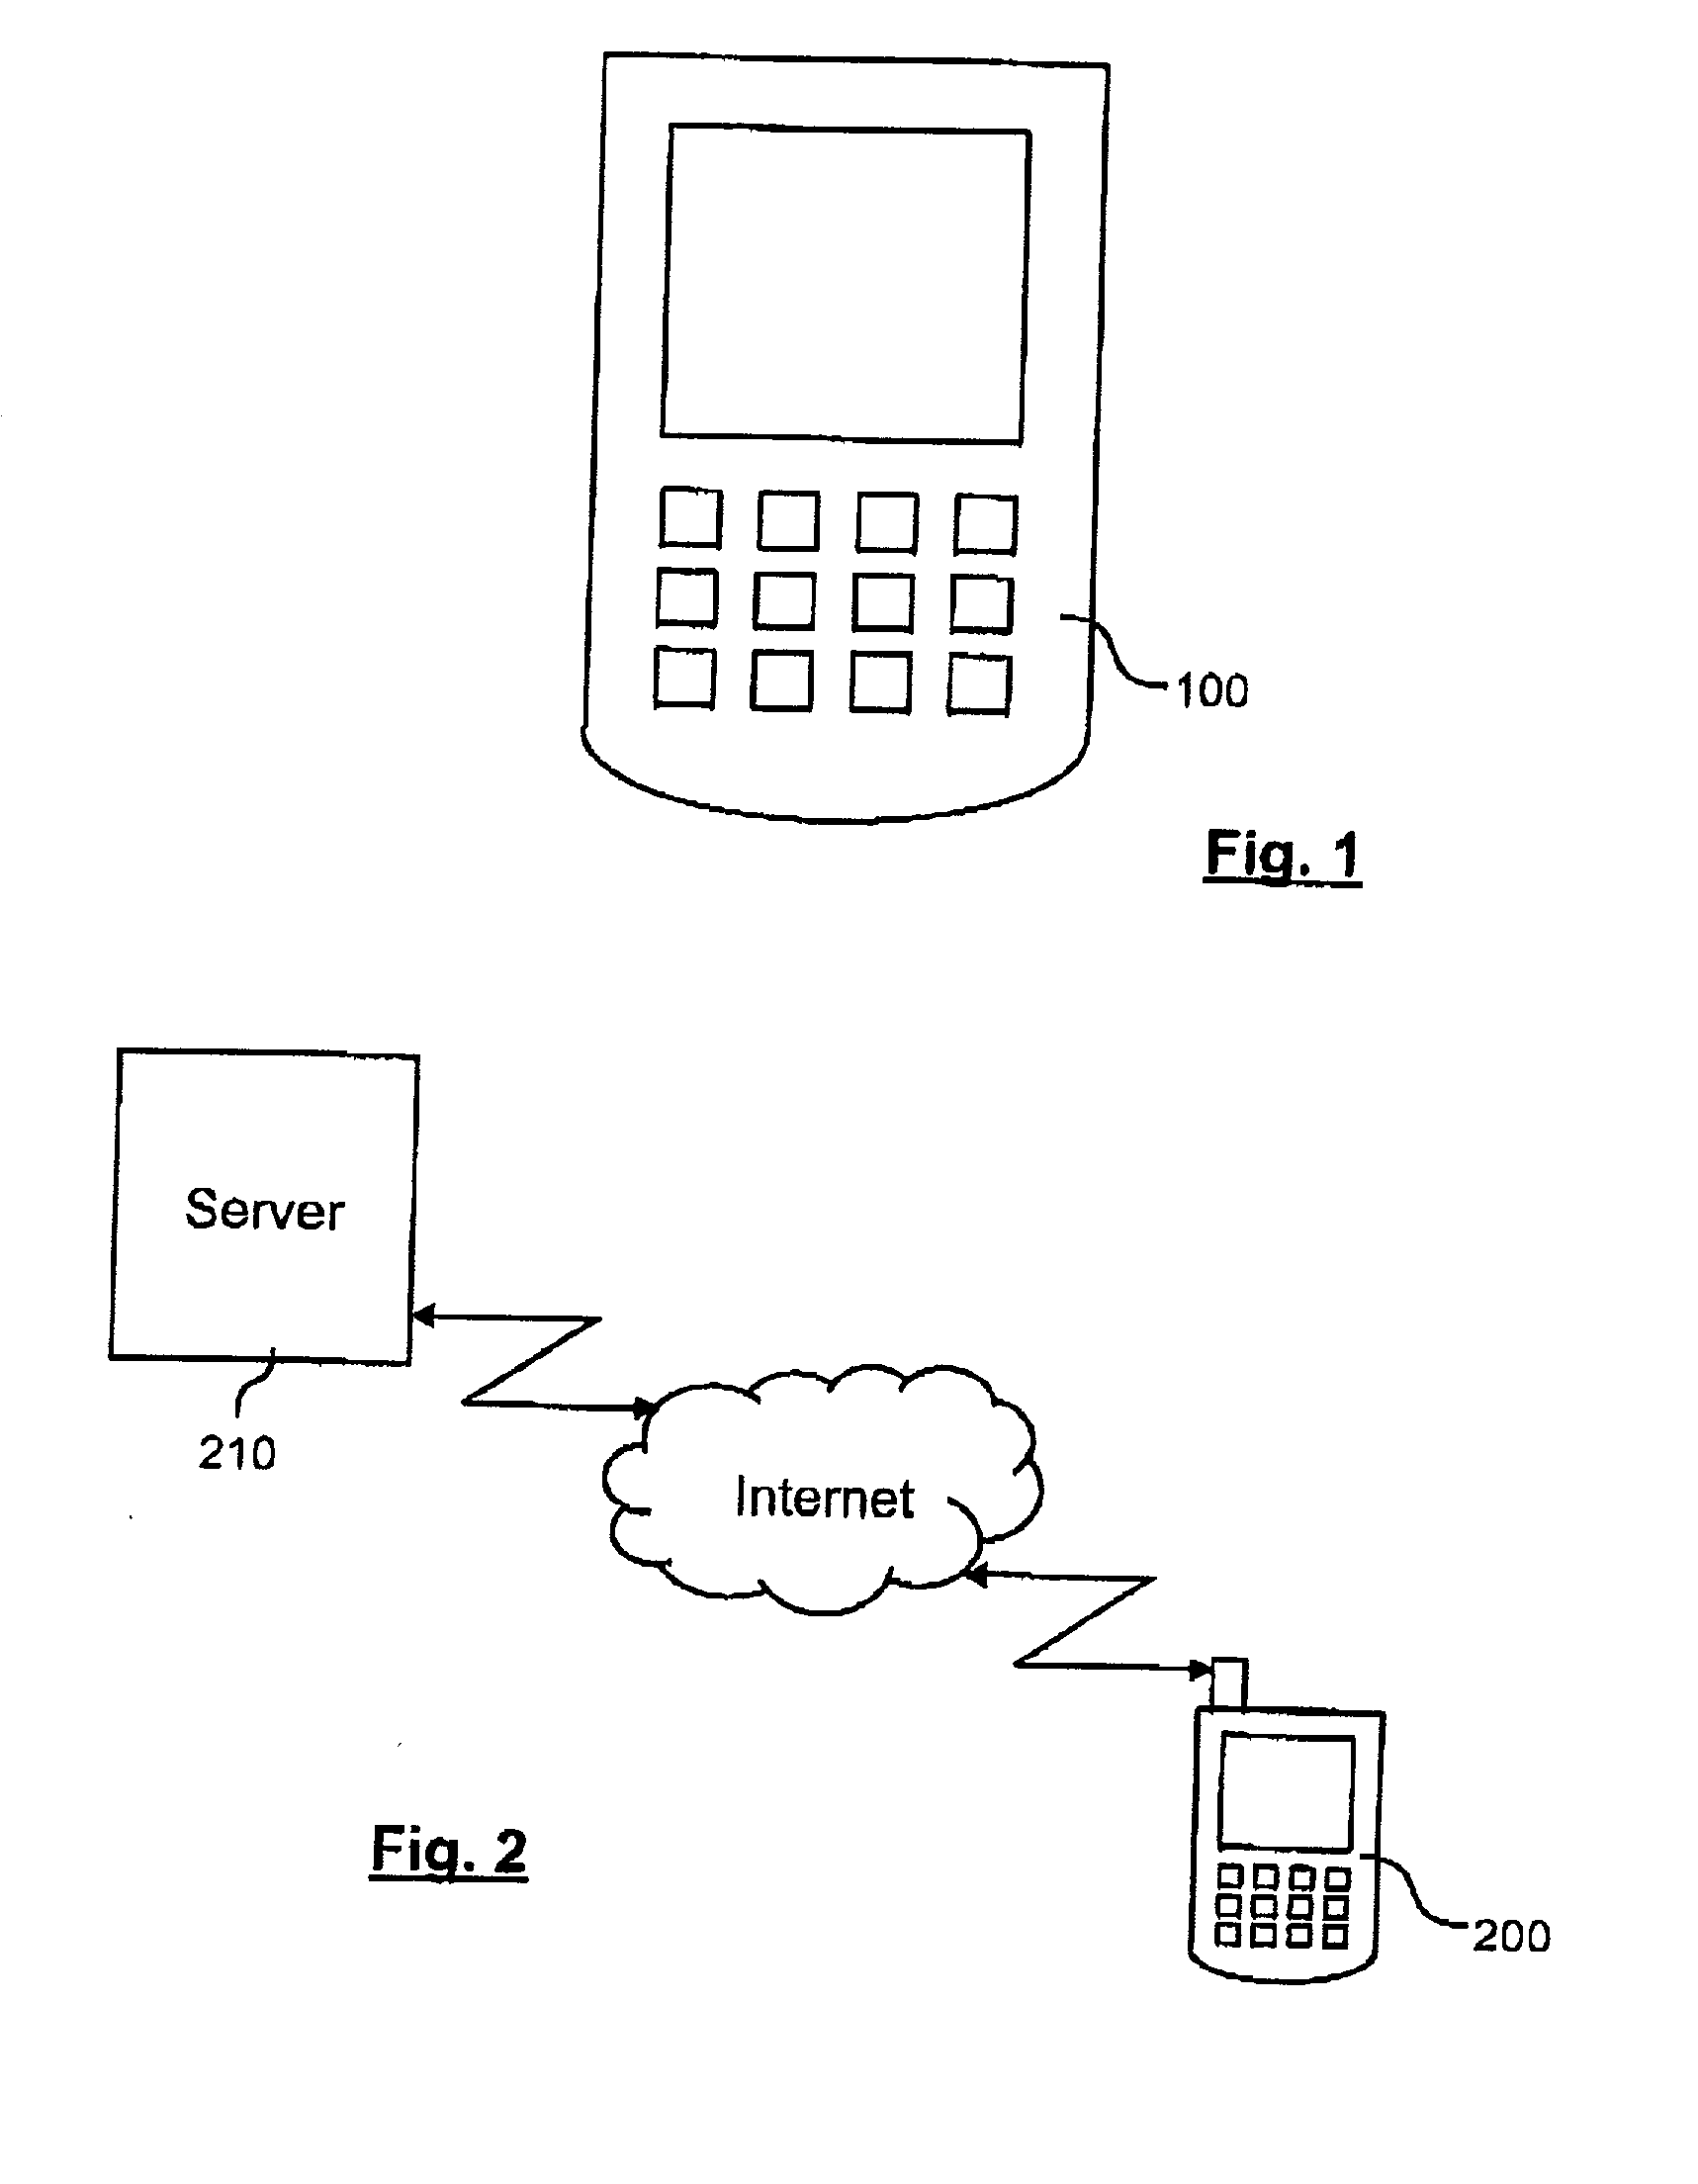 Method and device for producing an adapted travel treatment plan for administering a medicine in the event of a long-haul journey